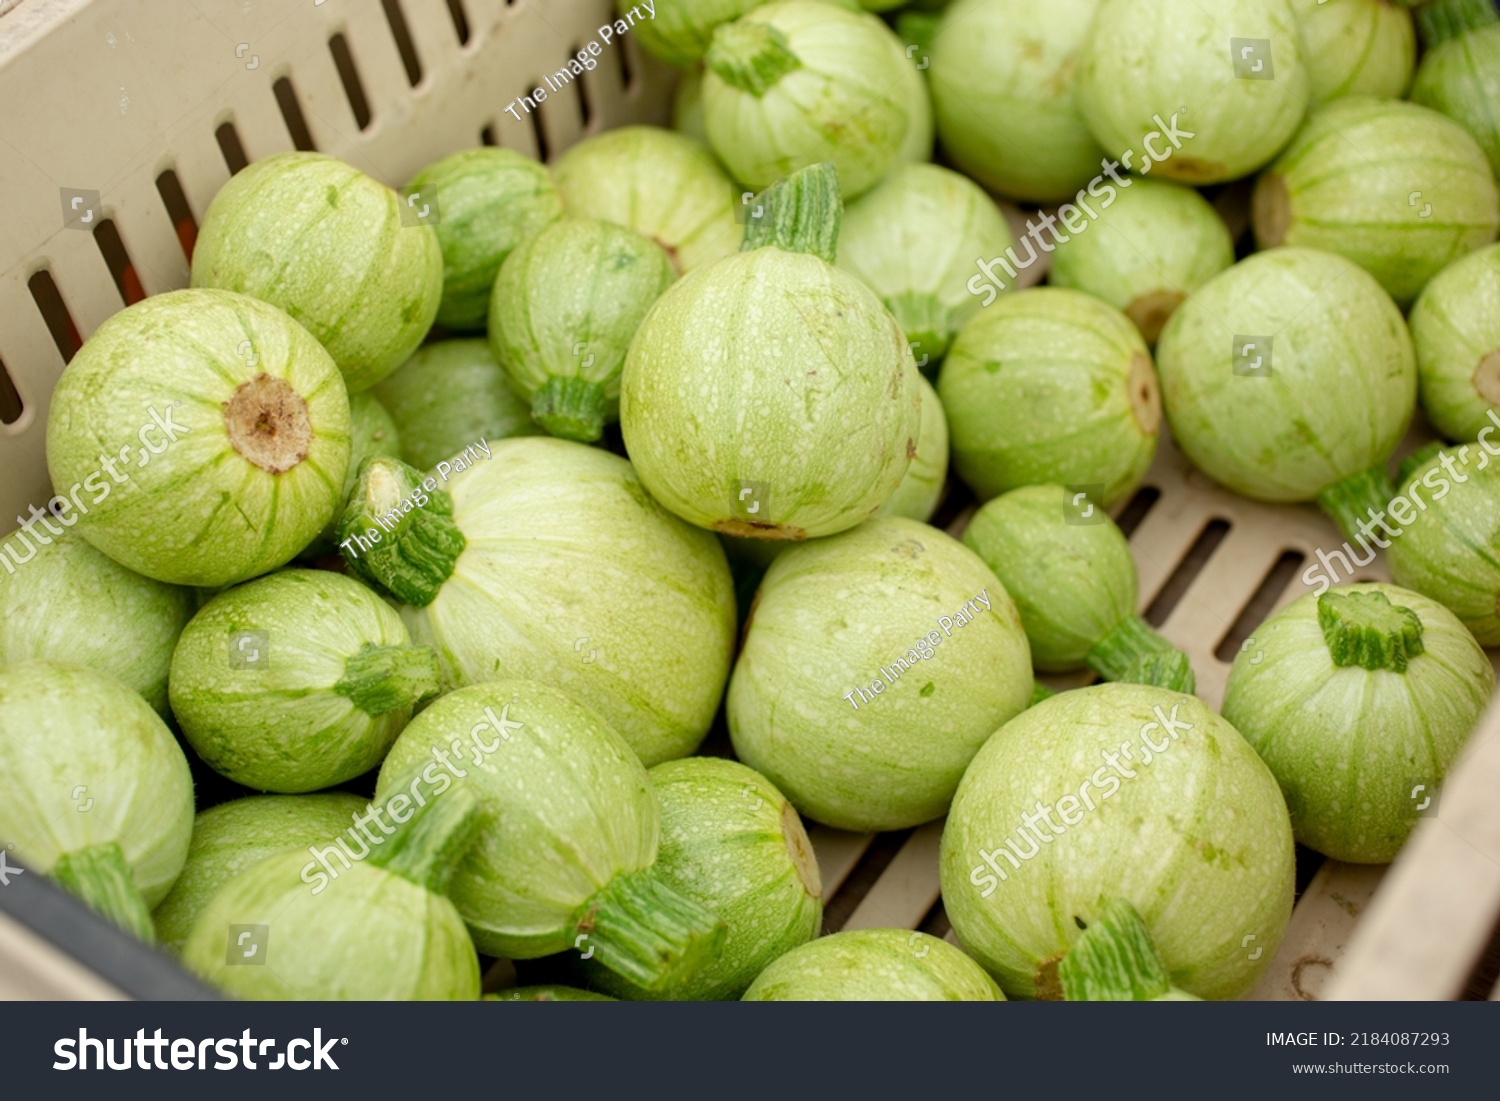 A view of a crate full of cue ball squash, on display at a local farmers market. #2184087293